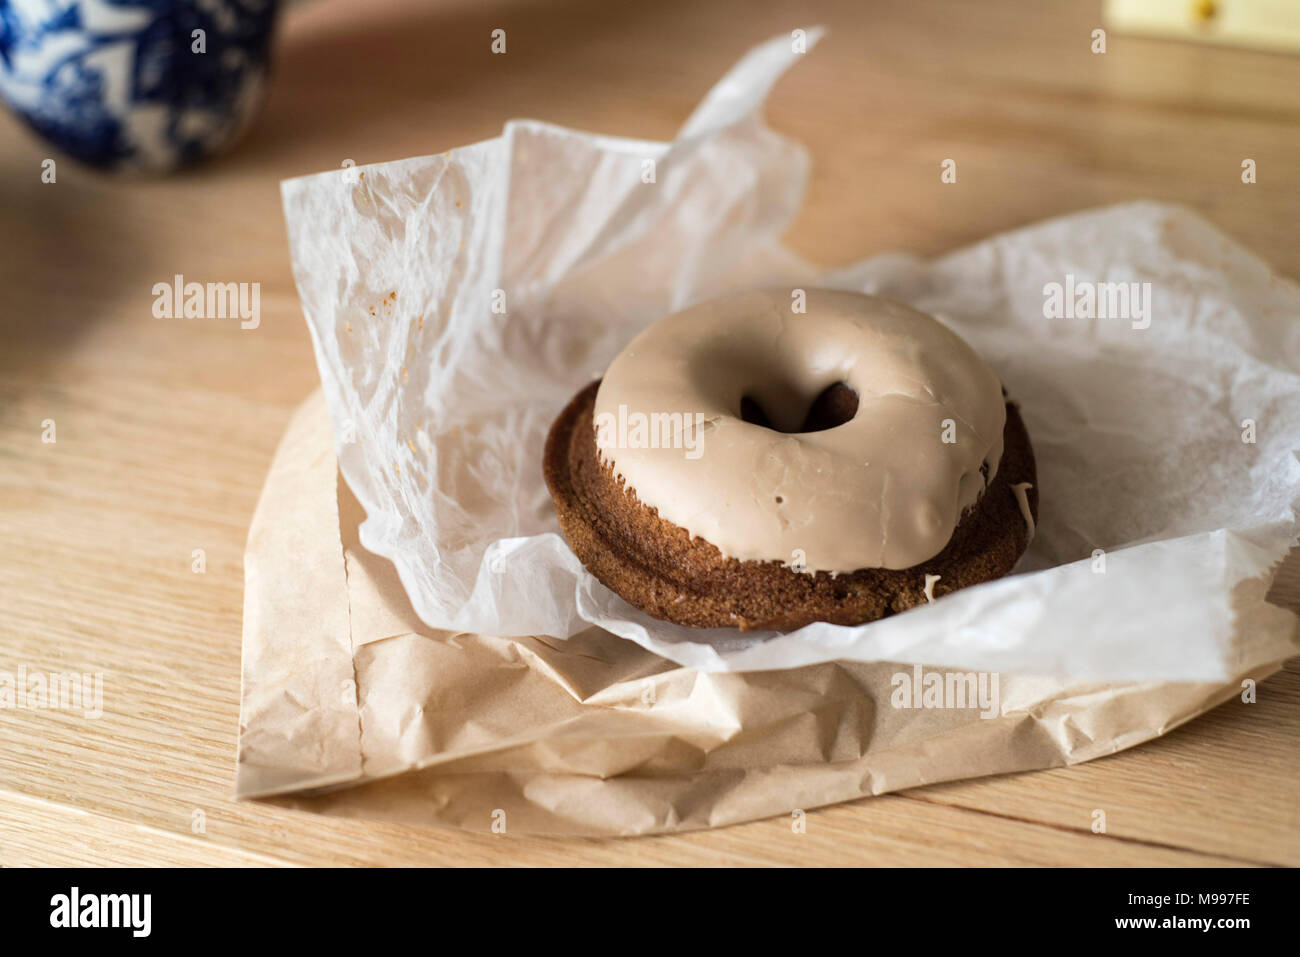 Maple Frosted Doughnut, a Break Time Snack Stock Photo